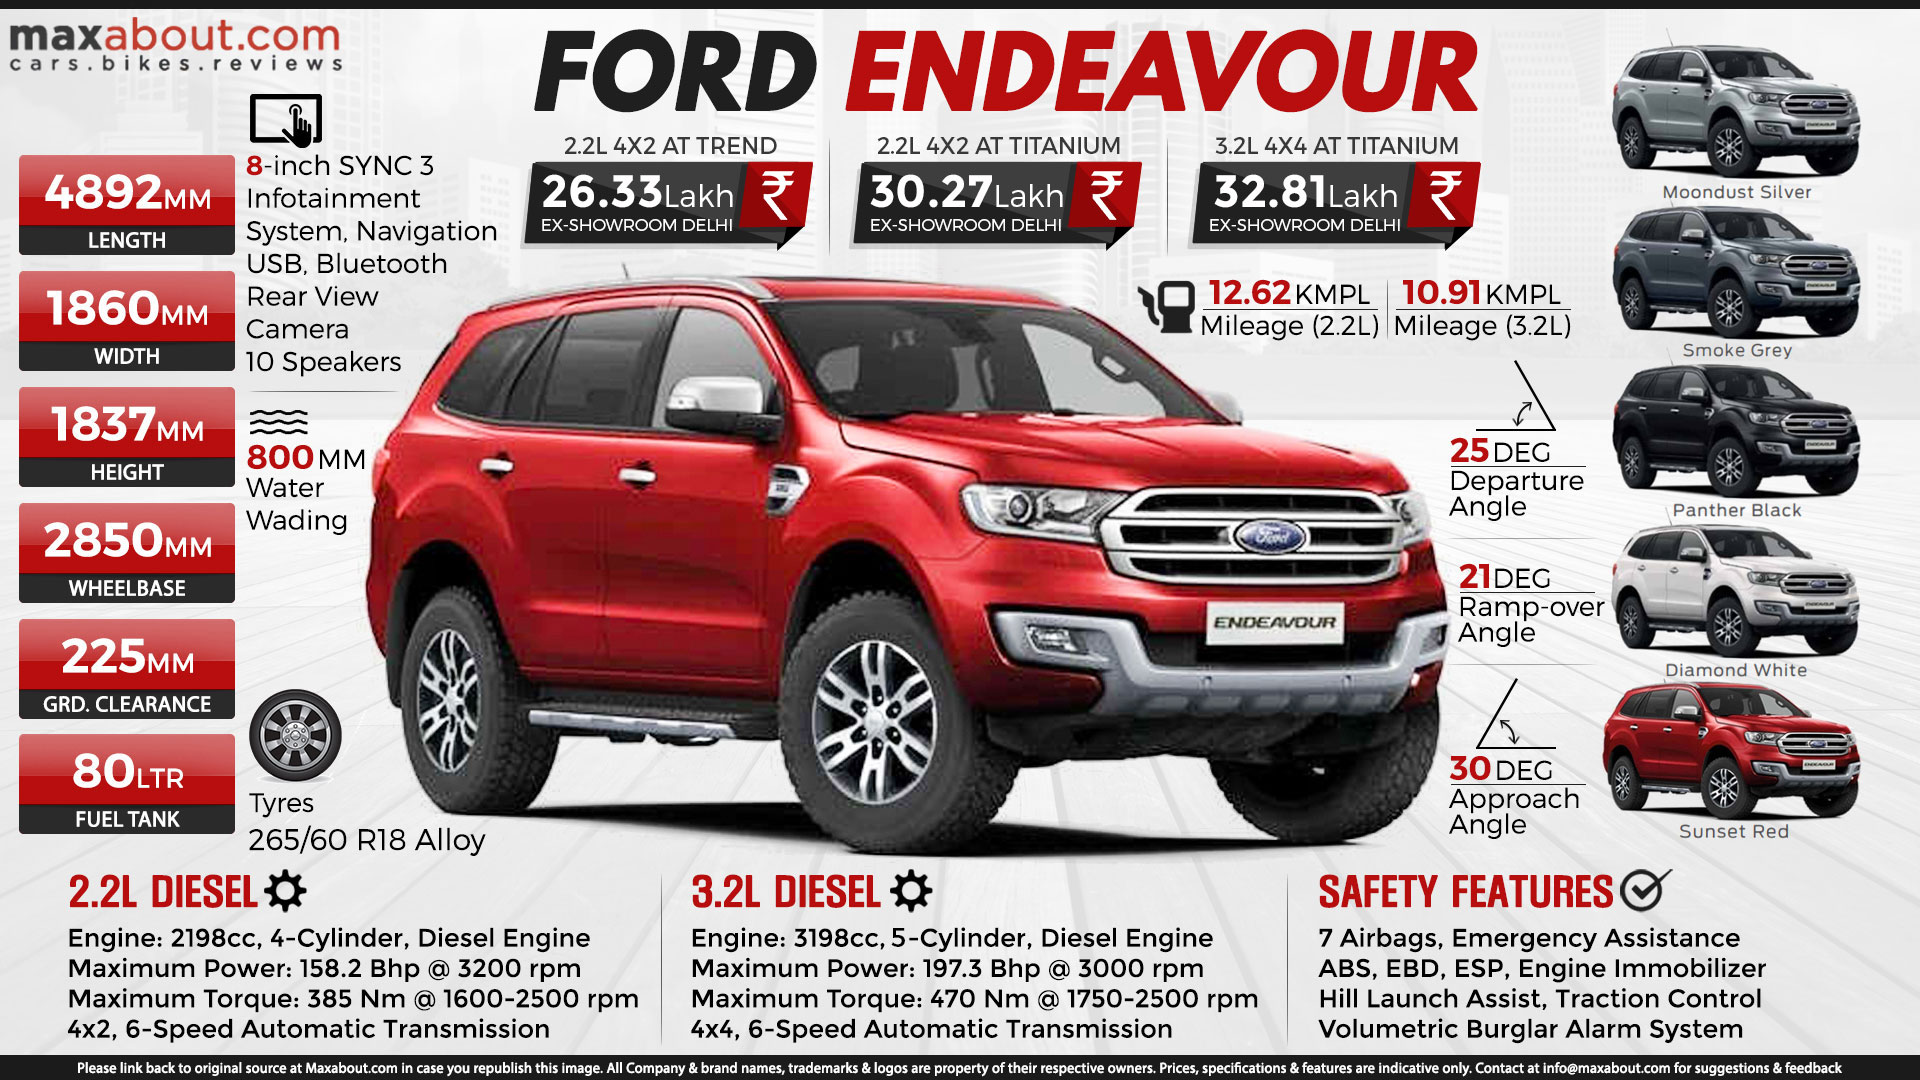 Quick Facts About the All-New Ford Endeavour